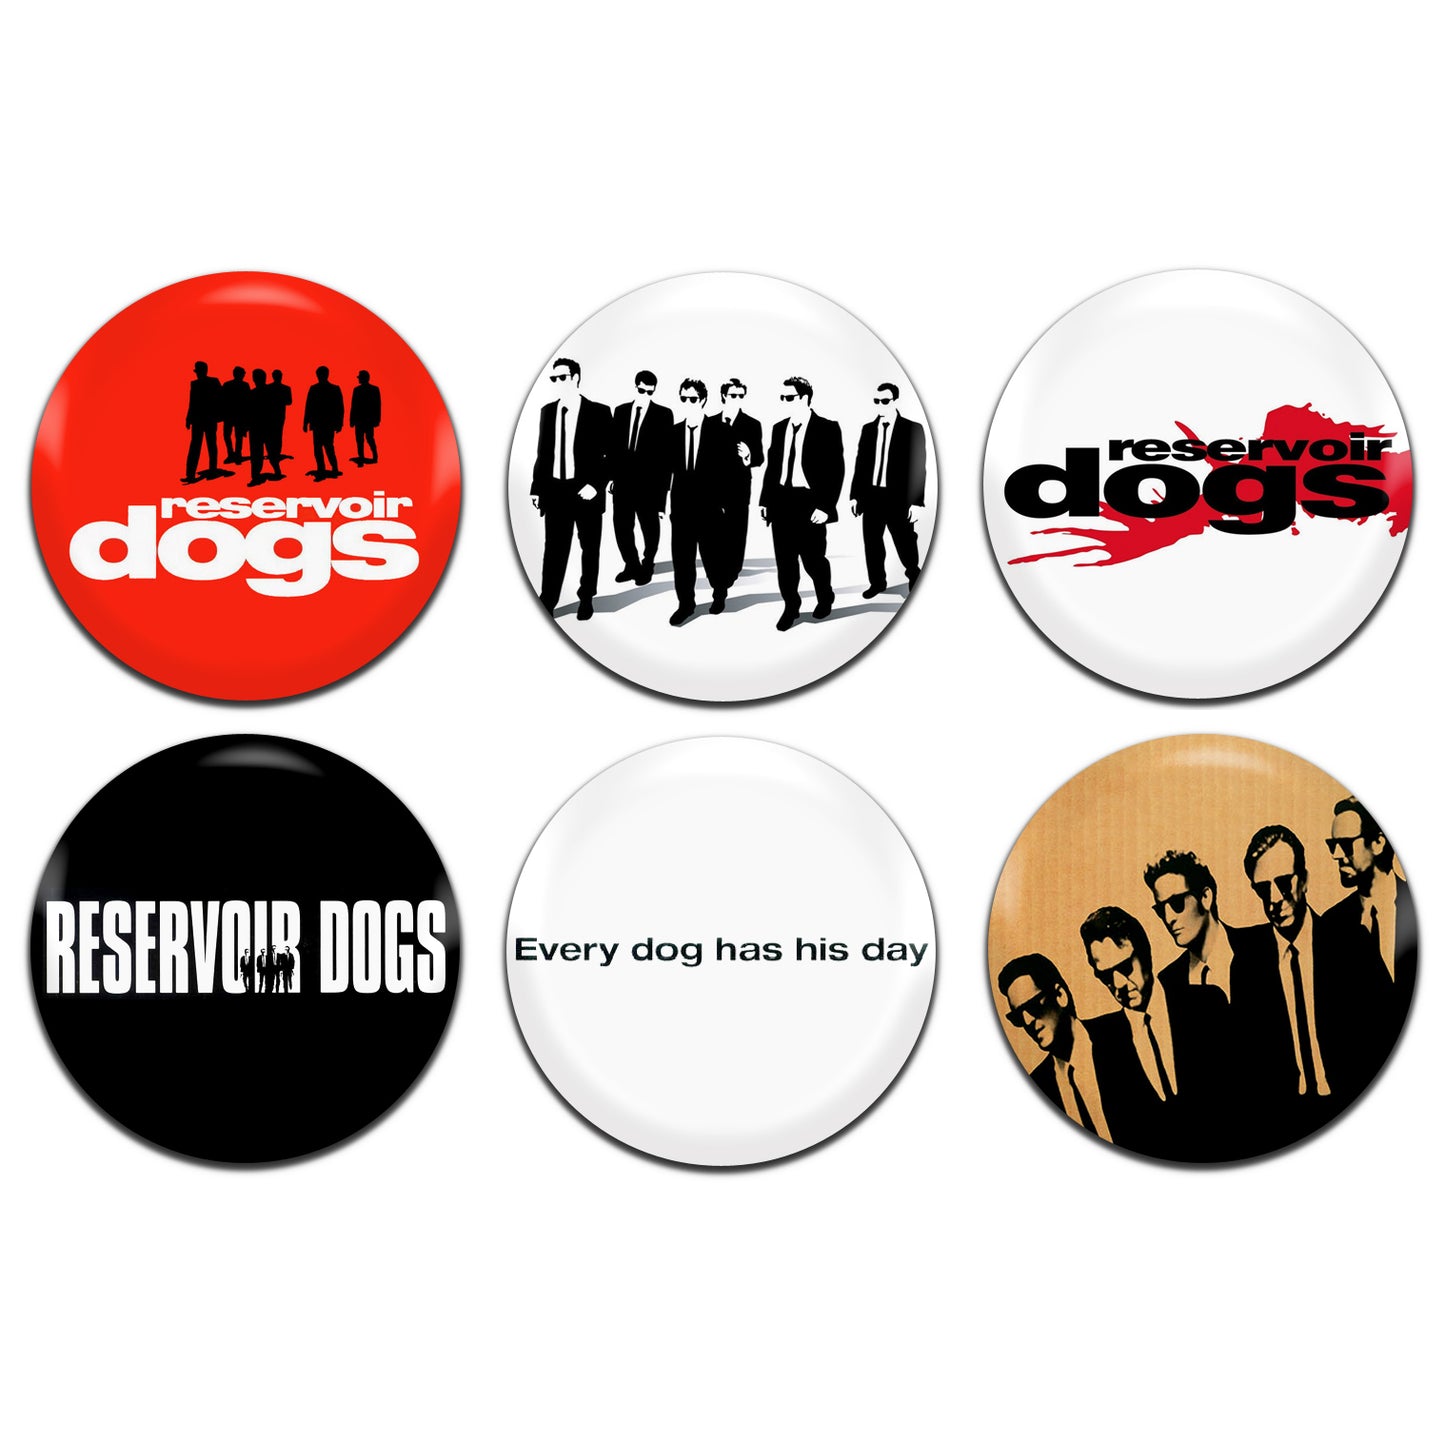 Reservoir Dogs Movie Gangster Film Quentin Tarantino 90's 25mm / 1 Inch D-Pin Button Badges (6x Set)